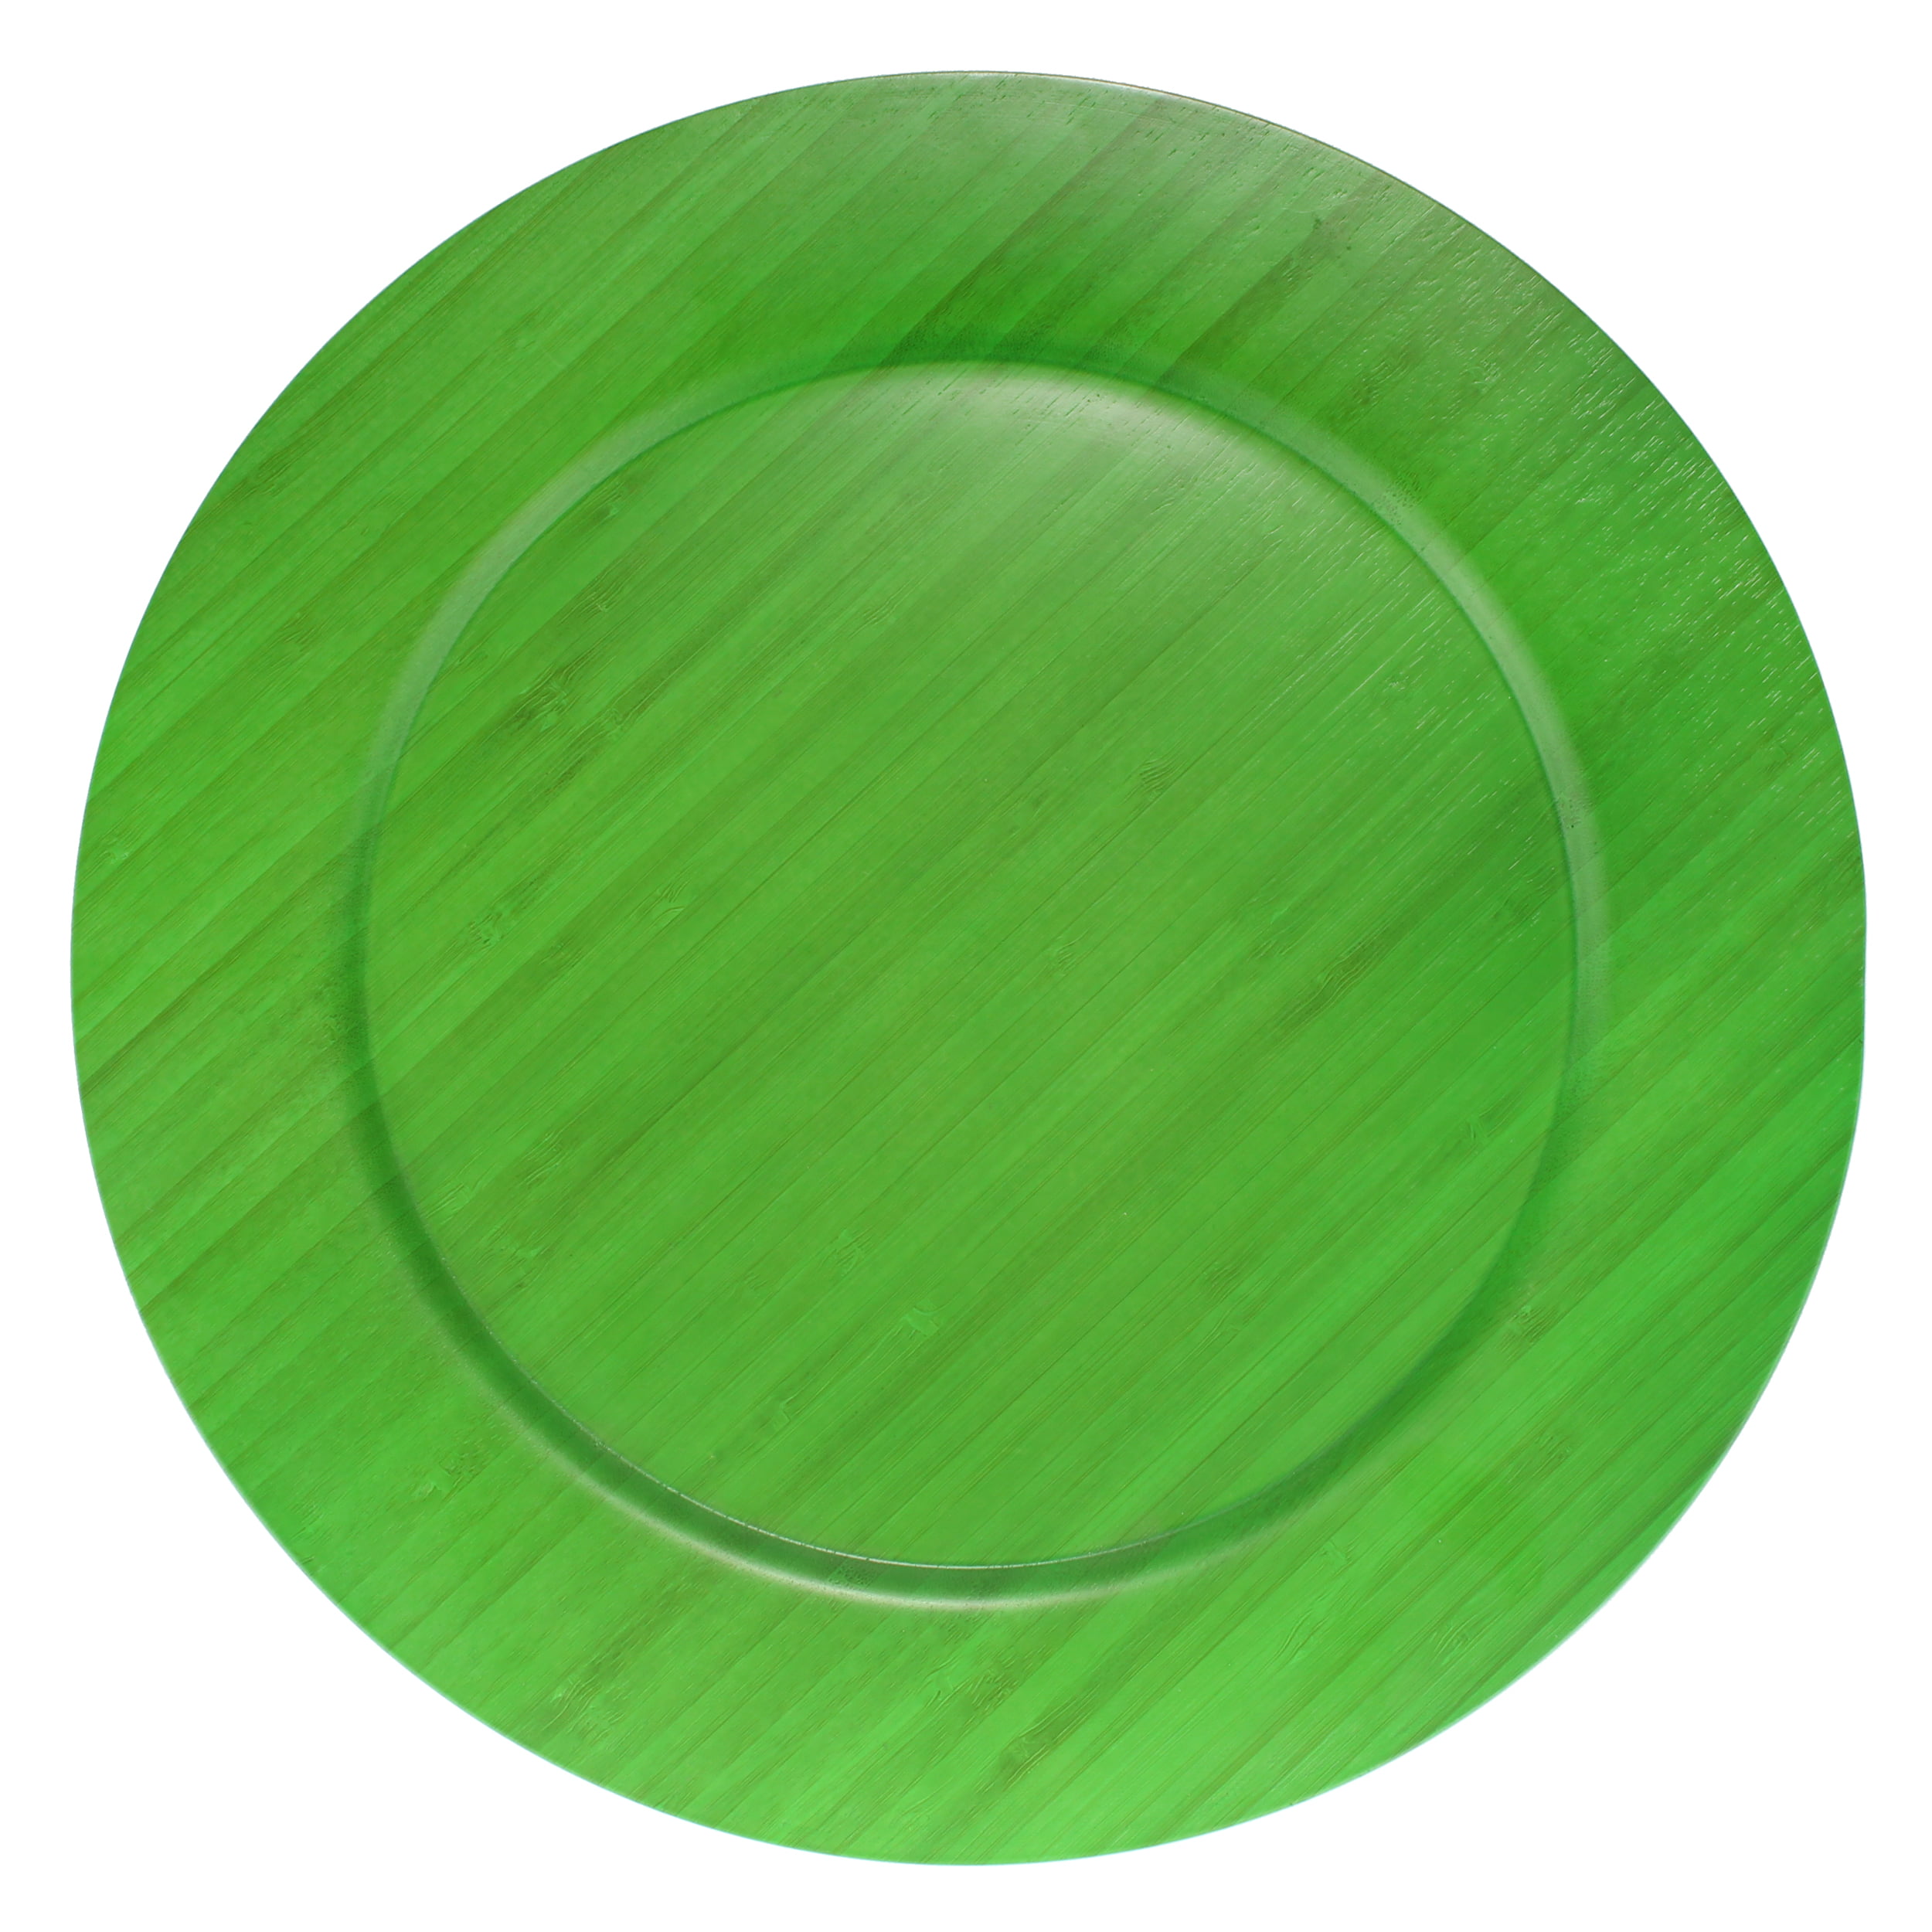 4 Pcs BambooMN 8 x 8 Bamboo Ecoware Reusable Dinnerware Square Plates for Catered Events or Home Use Supplies Holidays 